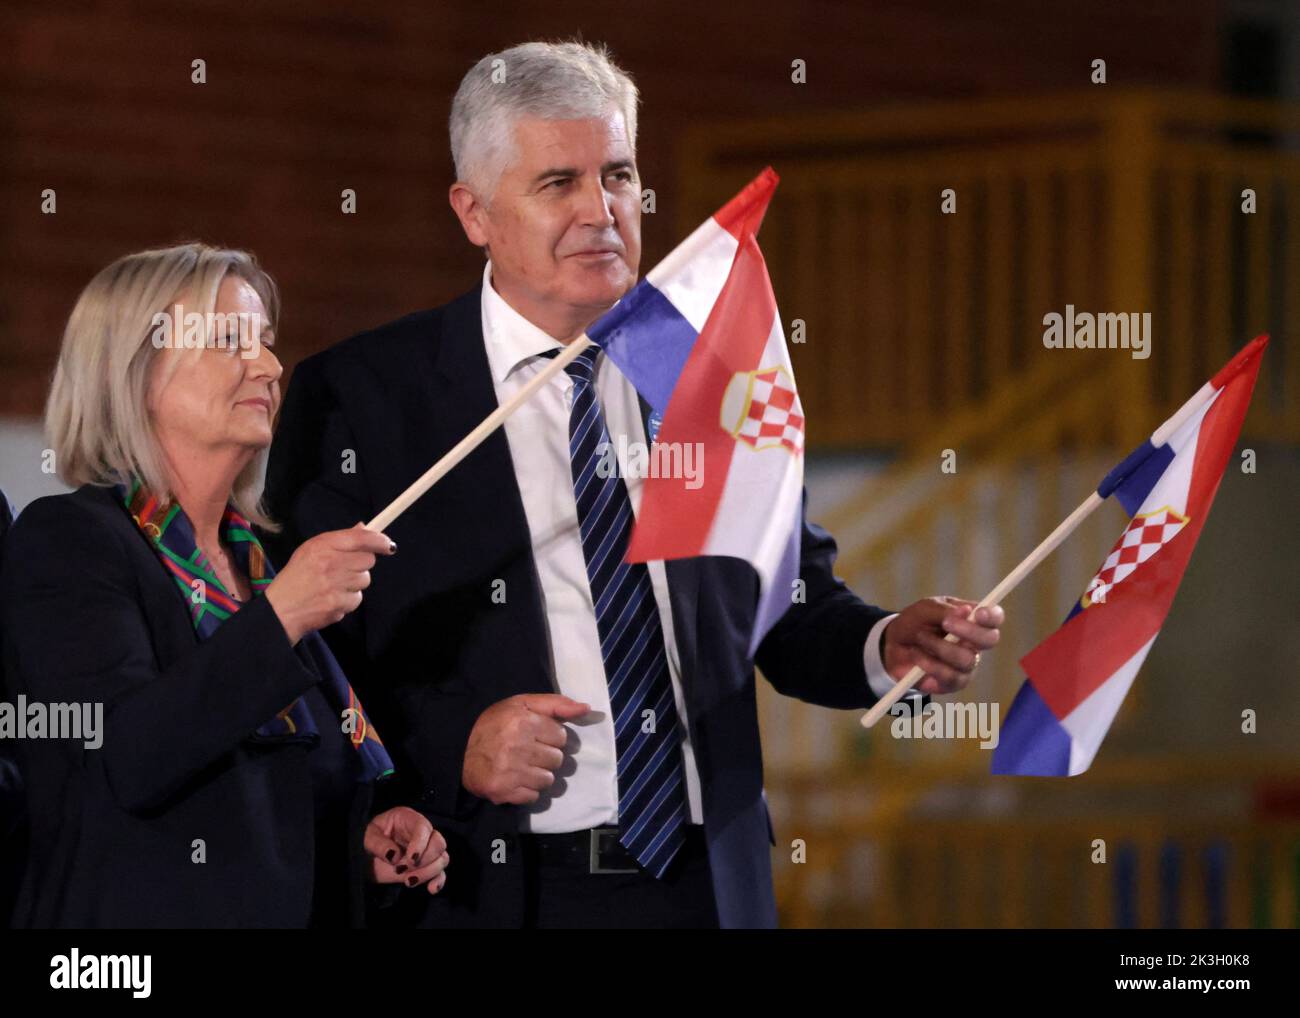 Borjana Kristo of the Croatian Demotracit Union and Croat candidate of the Tri-partite Bosnian Presidency and Dragan Covic, President of Croatian Democratic Union attend a pre-election rally in Zepce, Bosnia and Herzegovina, September 26, 2022. REUTERS/Dado Ruvic Stock Photo